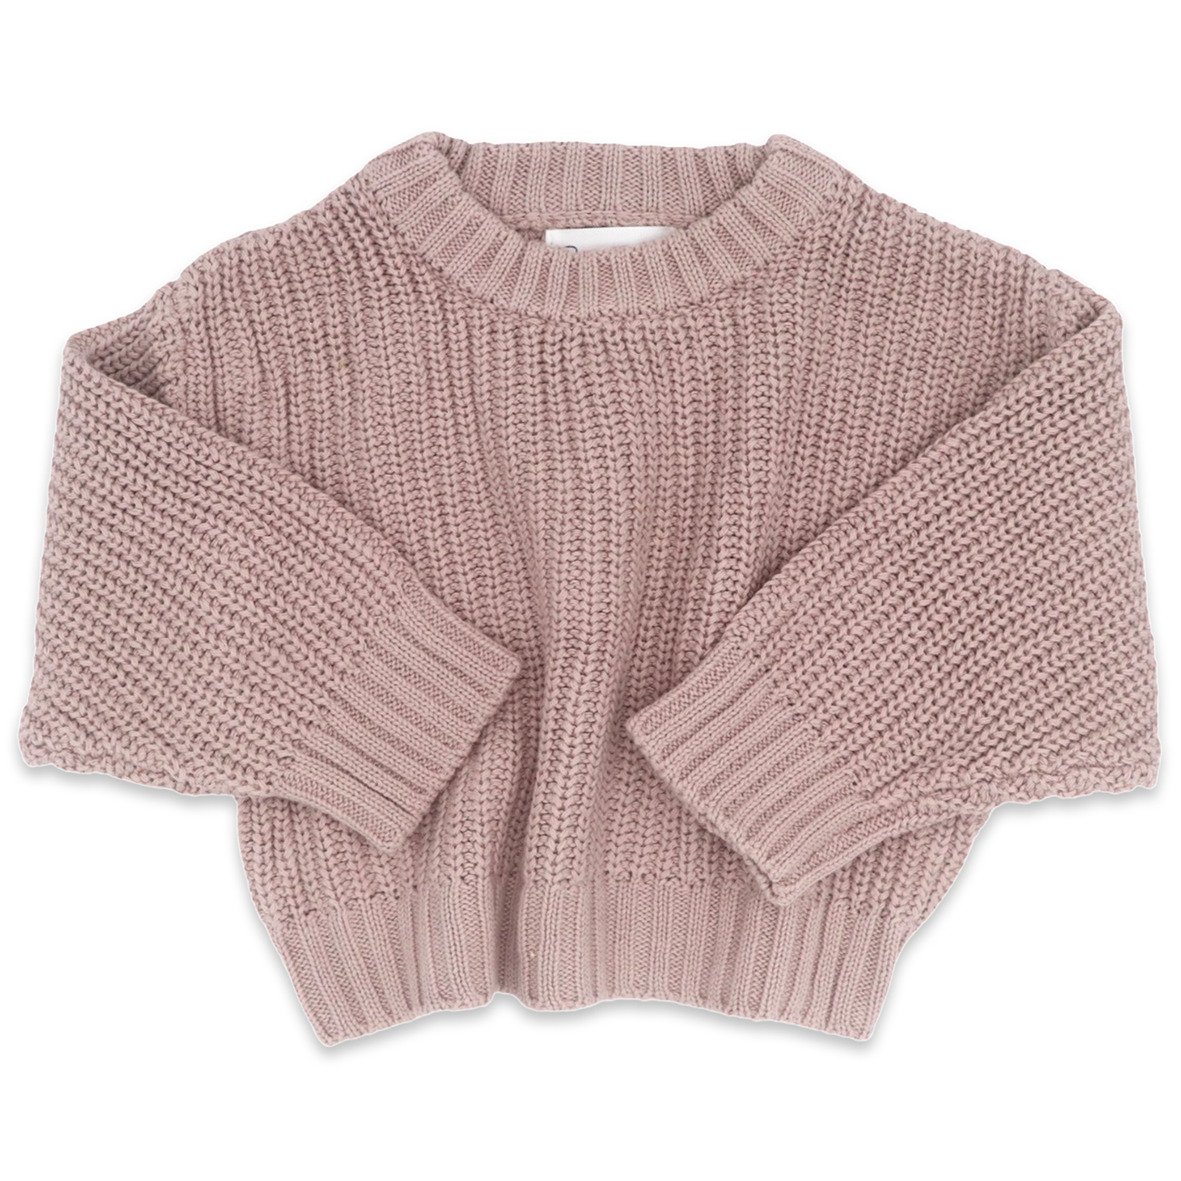 Bubbadue Knitted Baby Jersey (0-6 Months) - Bubbadue